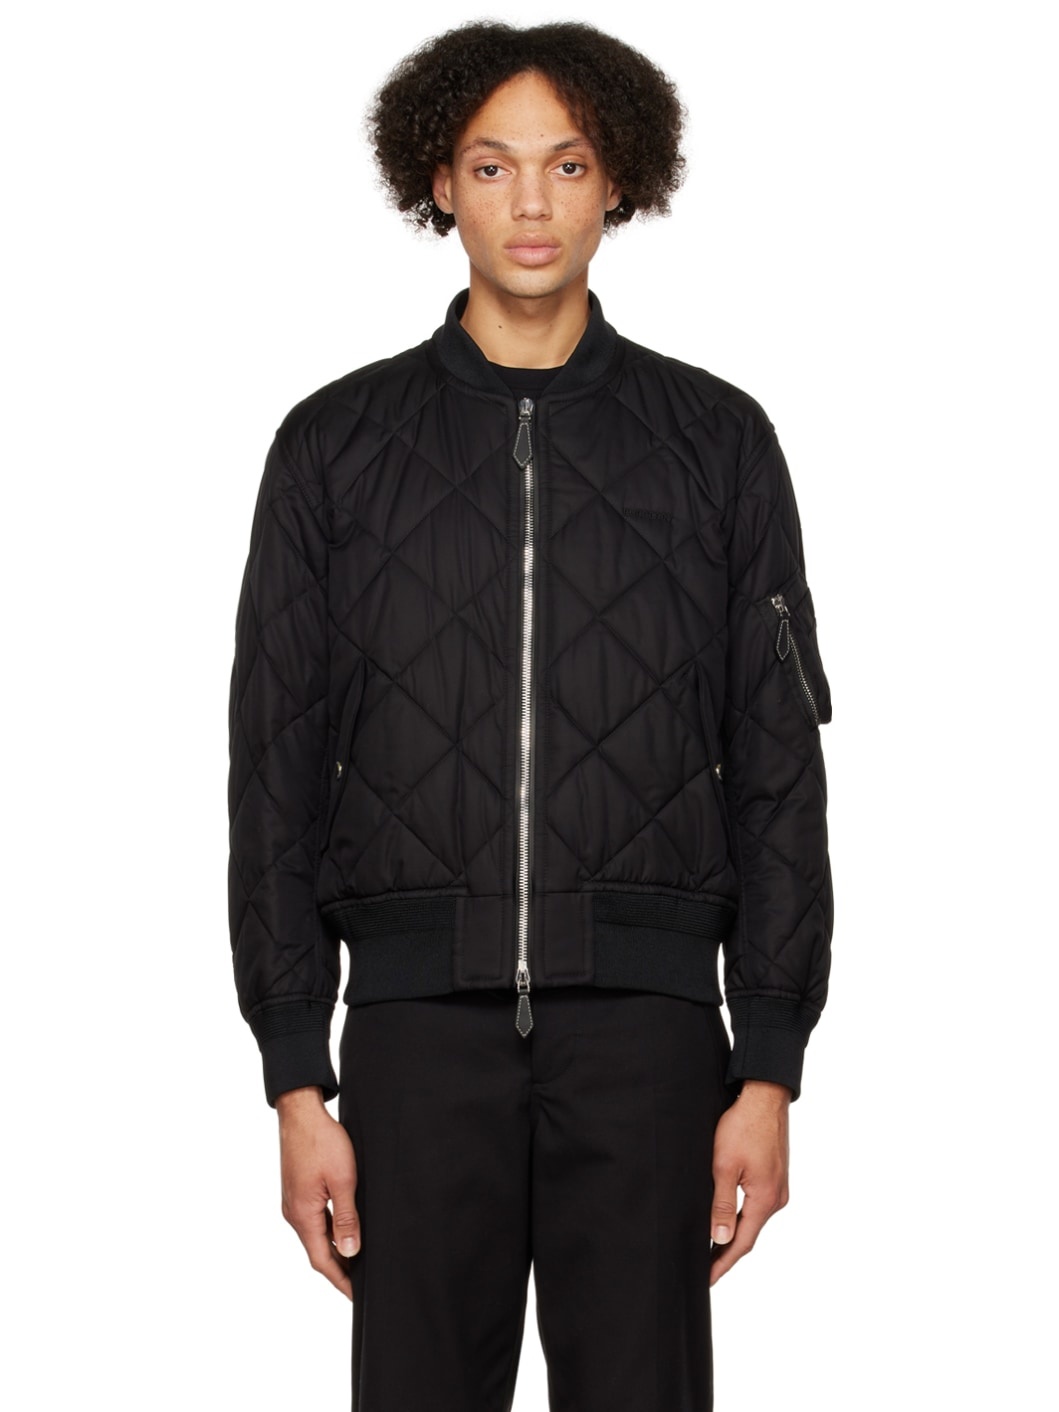 Black Diamond Quilted Bomber Jacket - 1